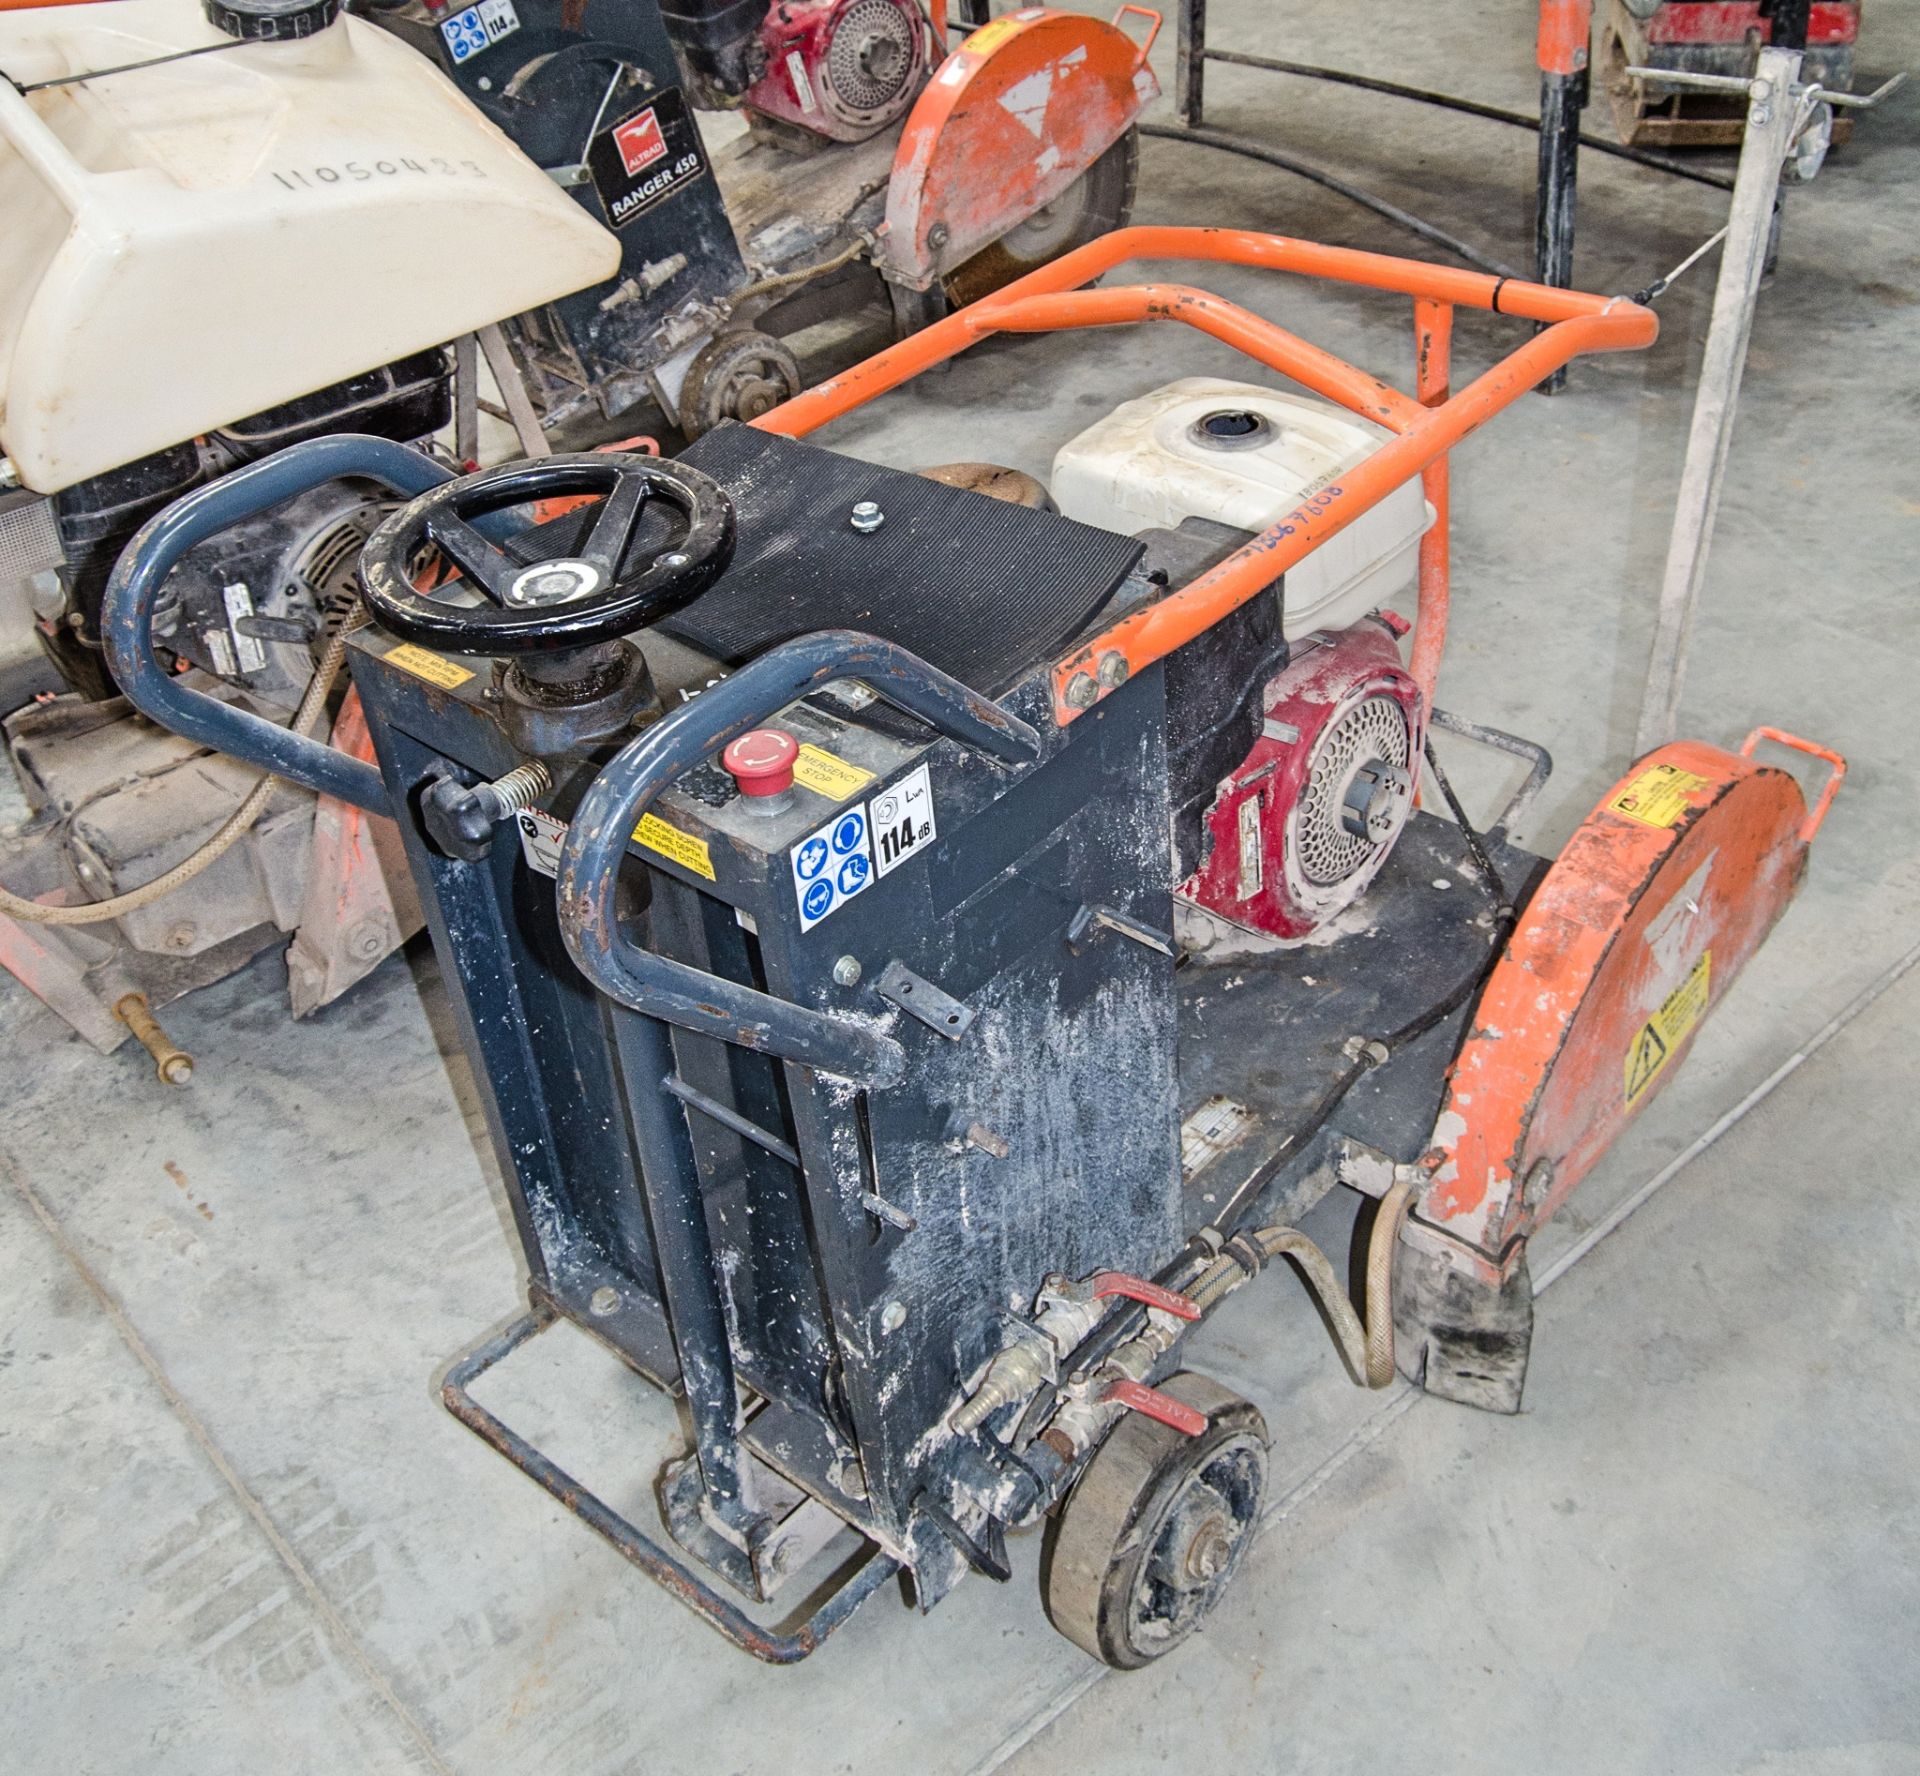 Altrad Ranger 450 petrol driven road saw ** Pull cord assembly missing ** 18067608 - Image 2 of 3